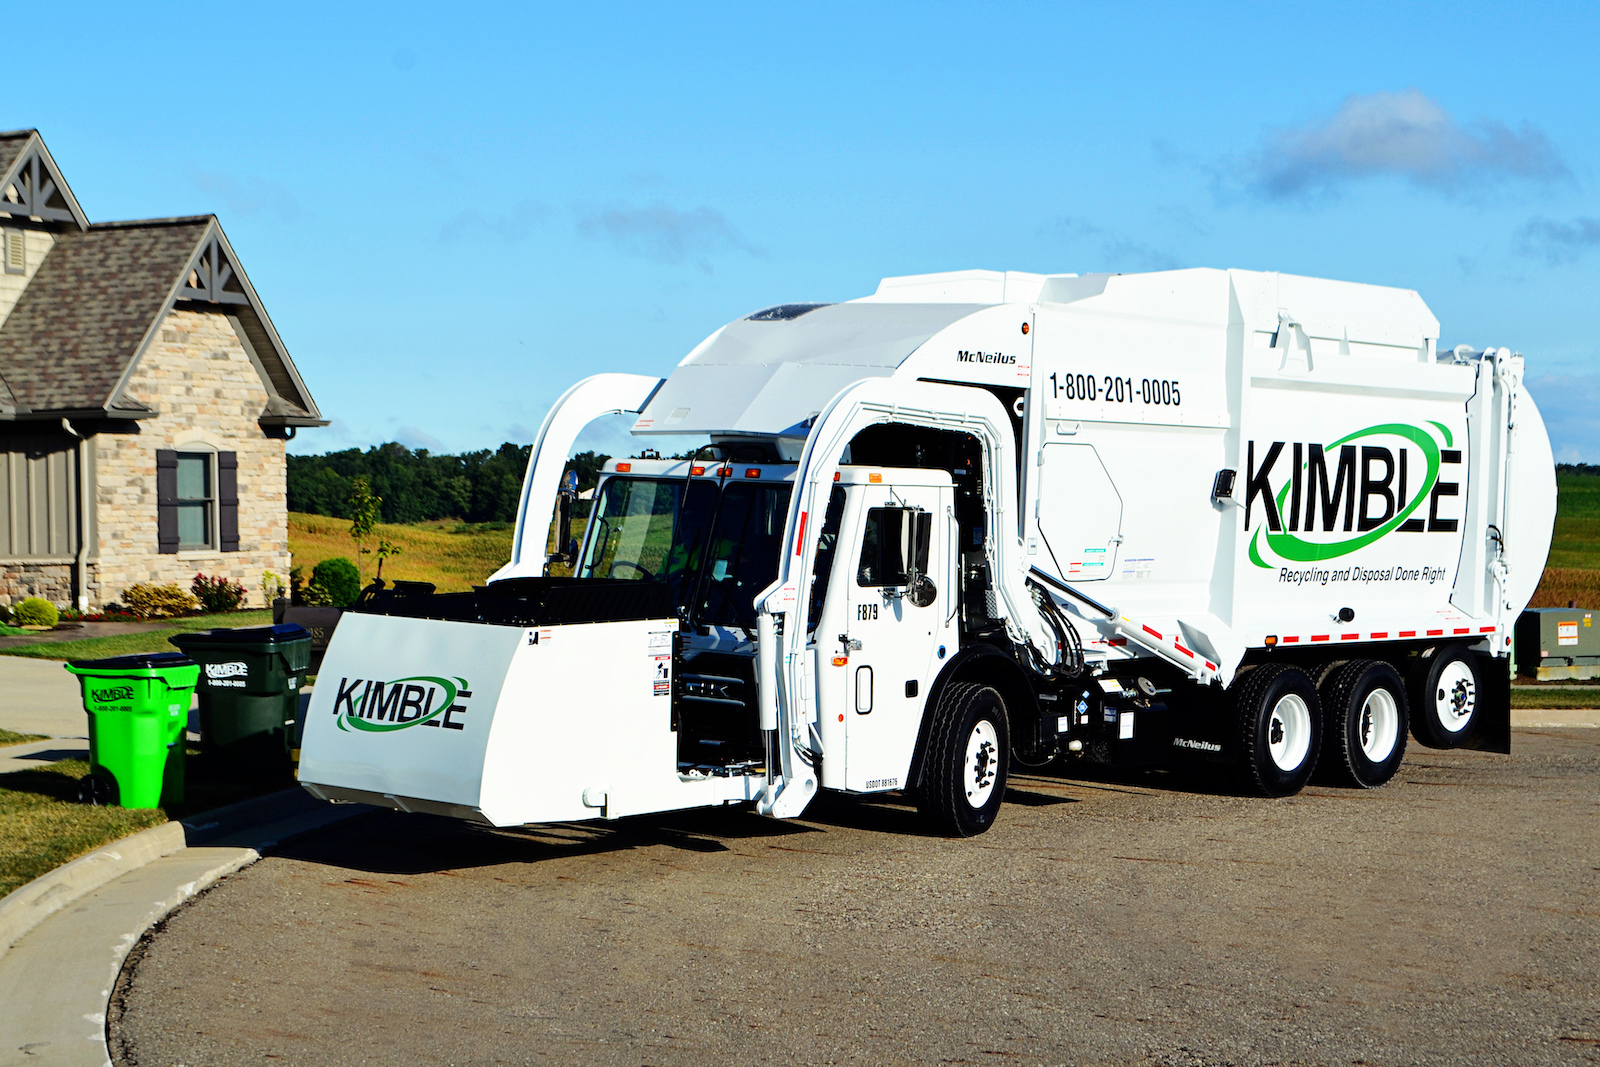 Learn how Kimble can support your town or home owners association with easy trash removal service